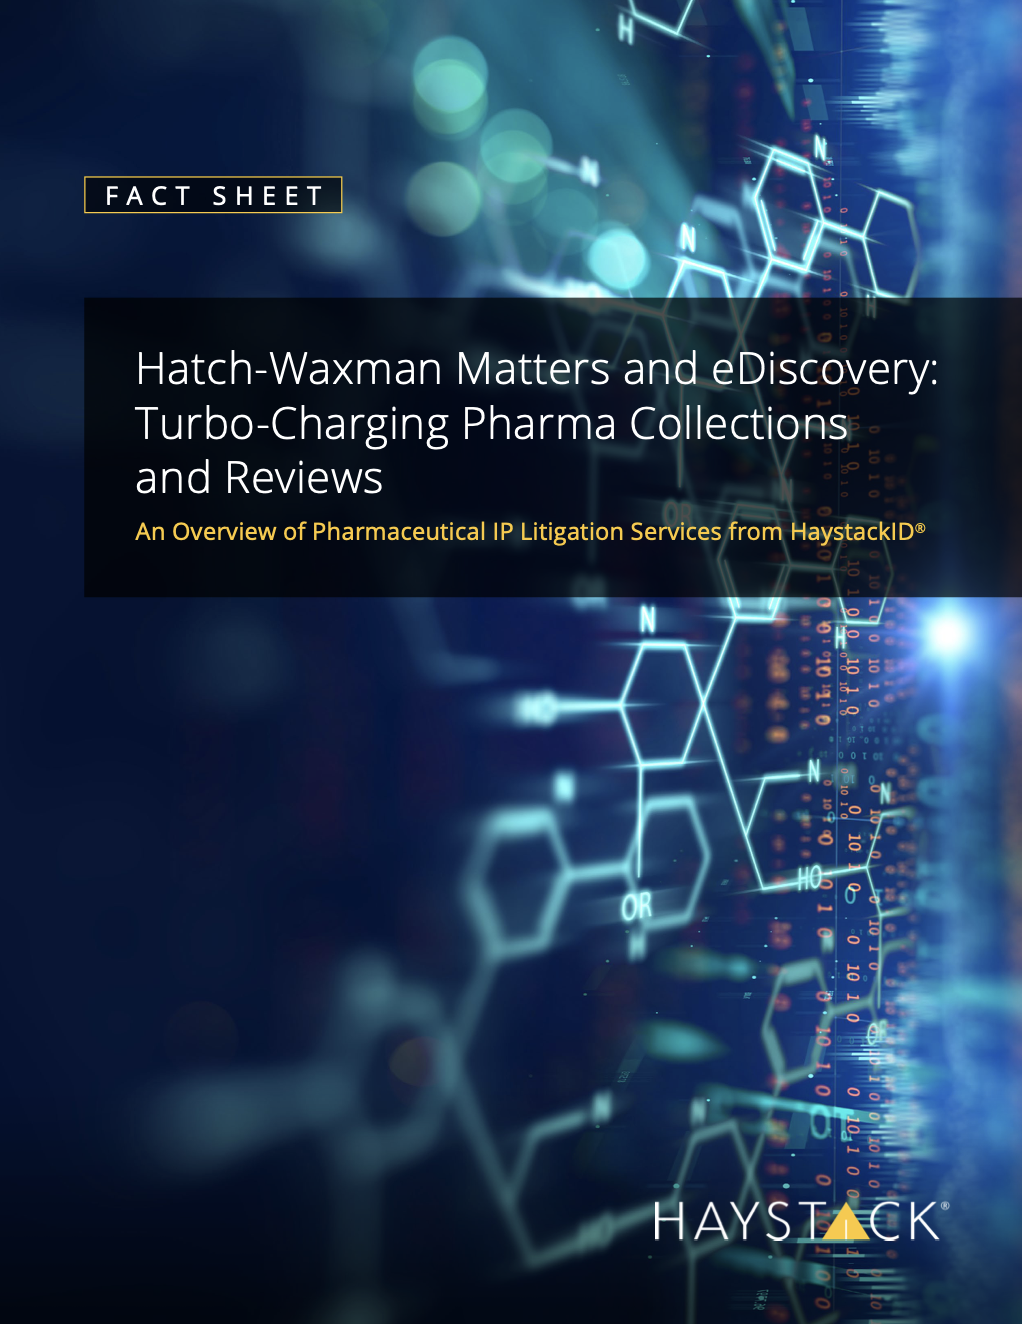 Hatch-Waxman Matters and eDiscovery